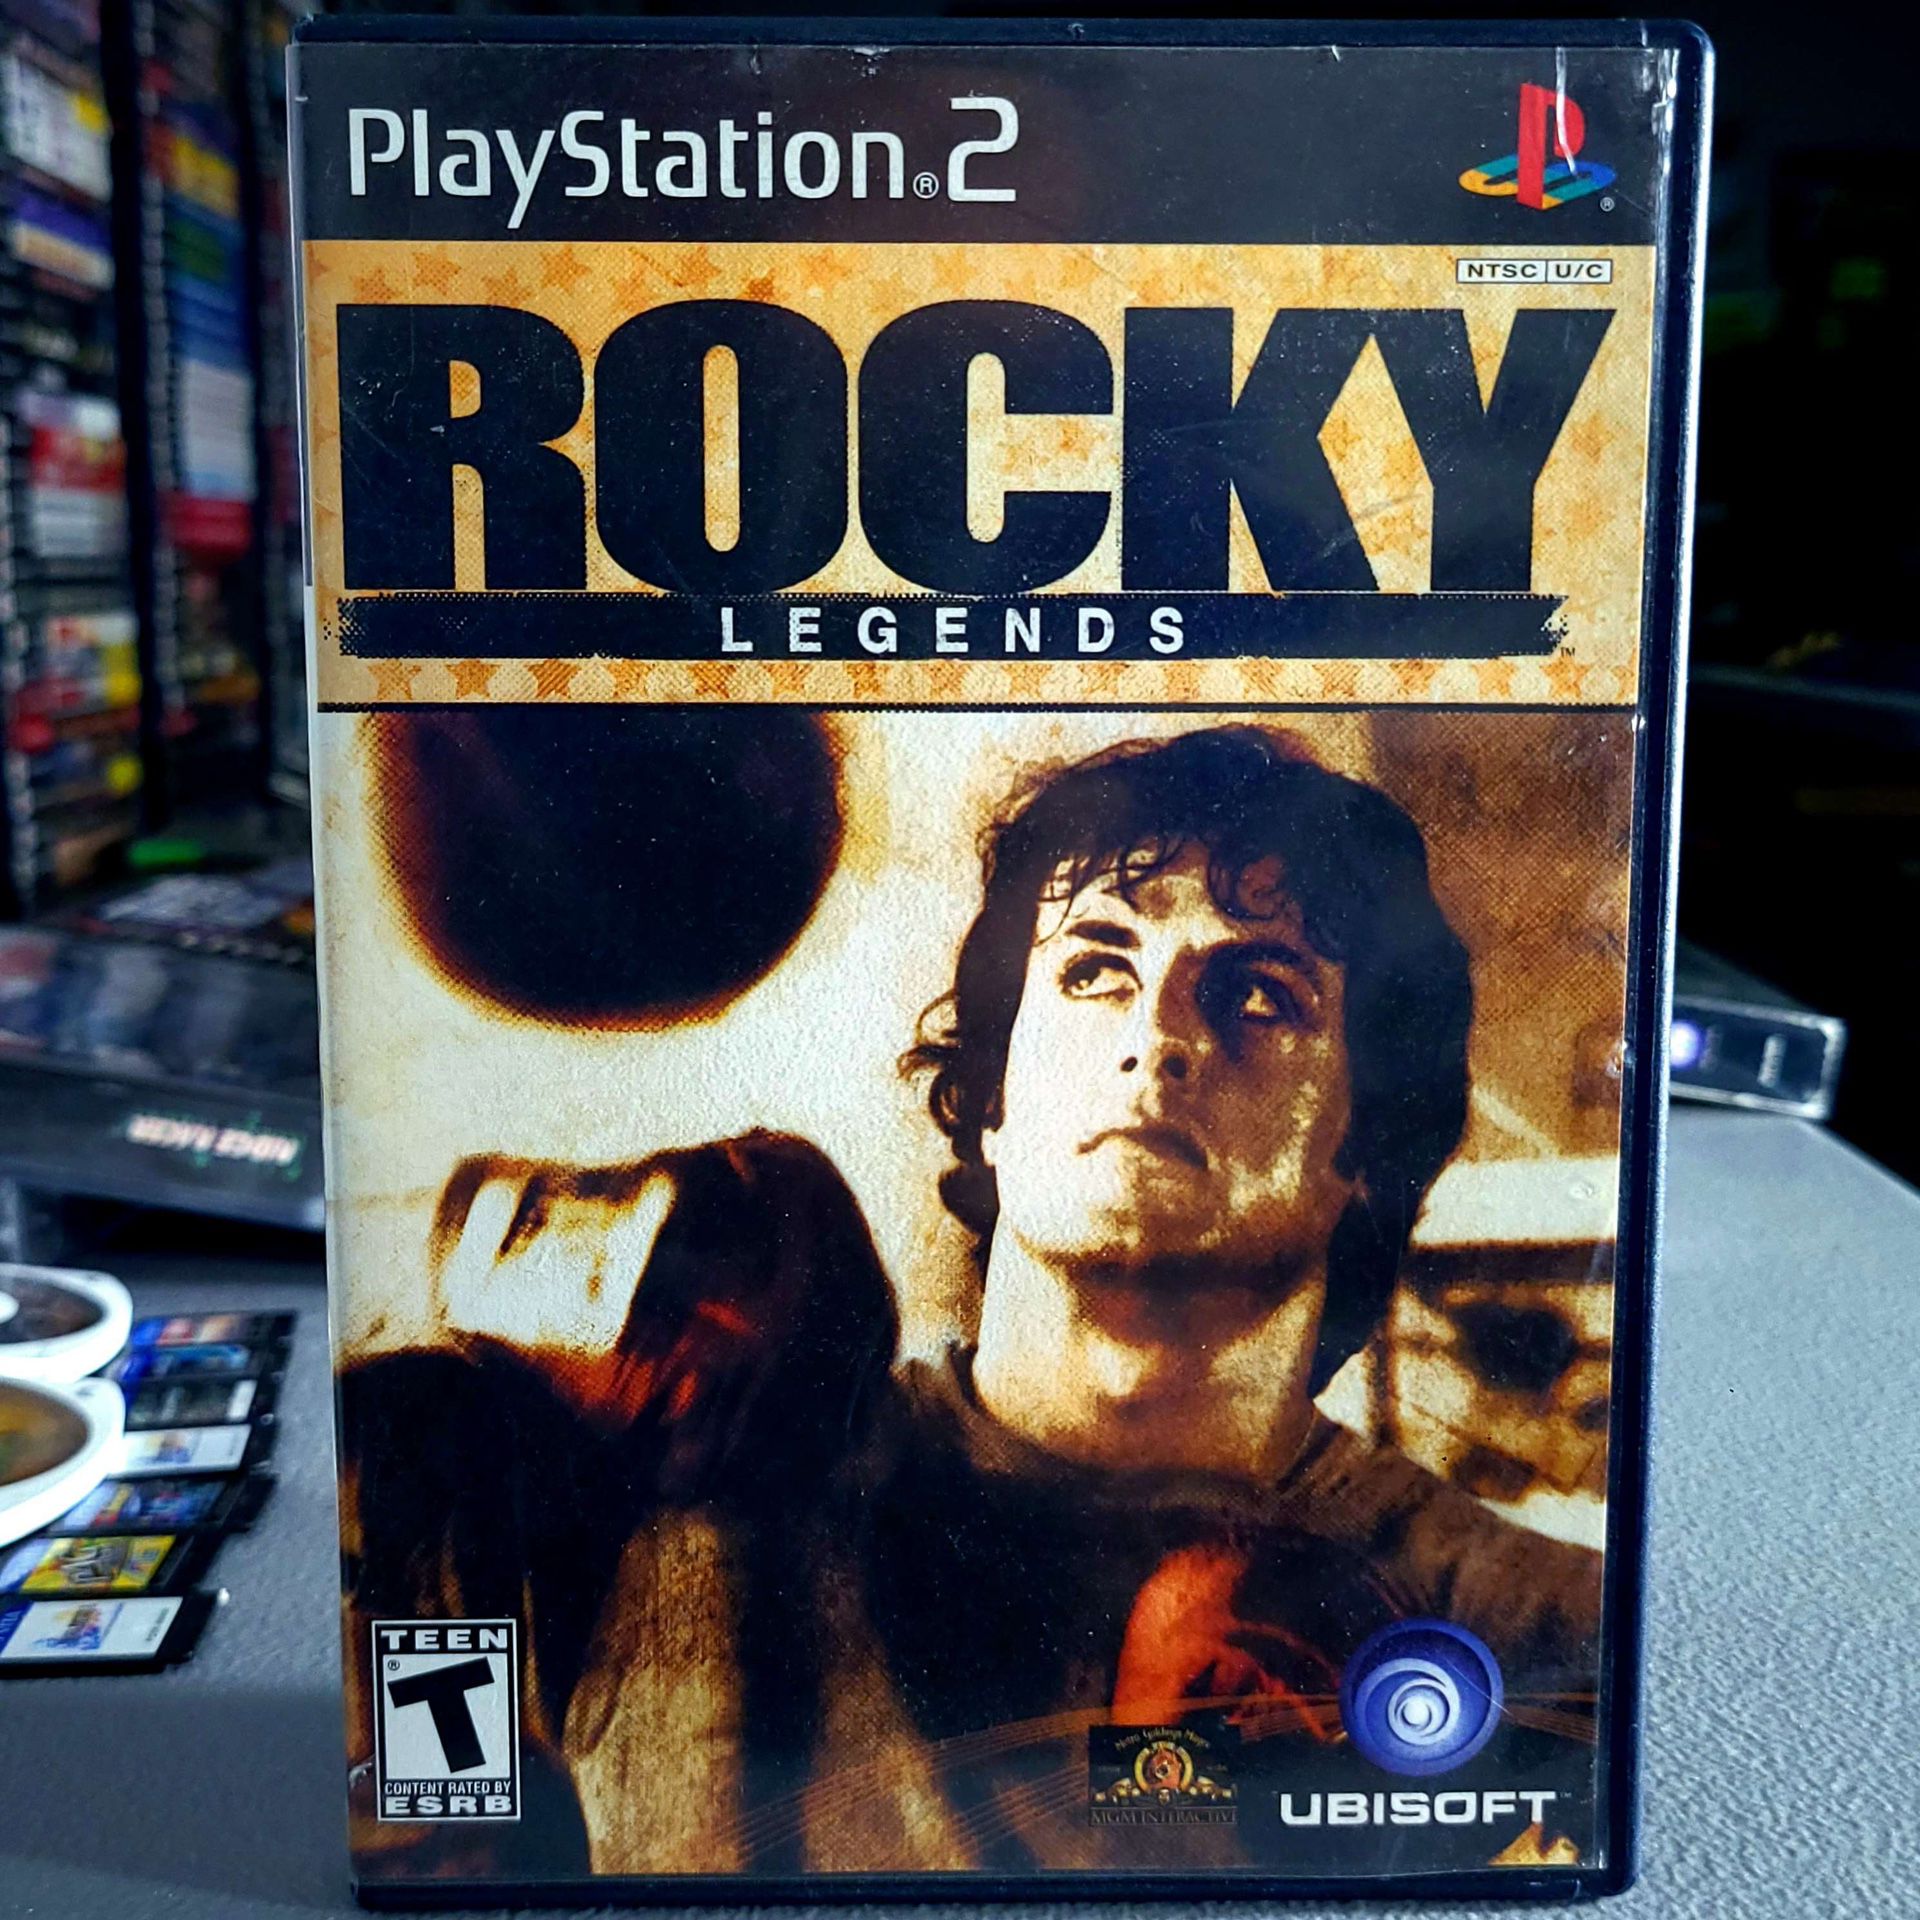 Rocky Legends (PlayStation 2, 2004) *TRADE IN YOUR OLD GAMES FOR CSH OR CREDIT HERE/WE FIX SYSTEMS*